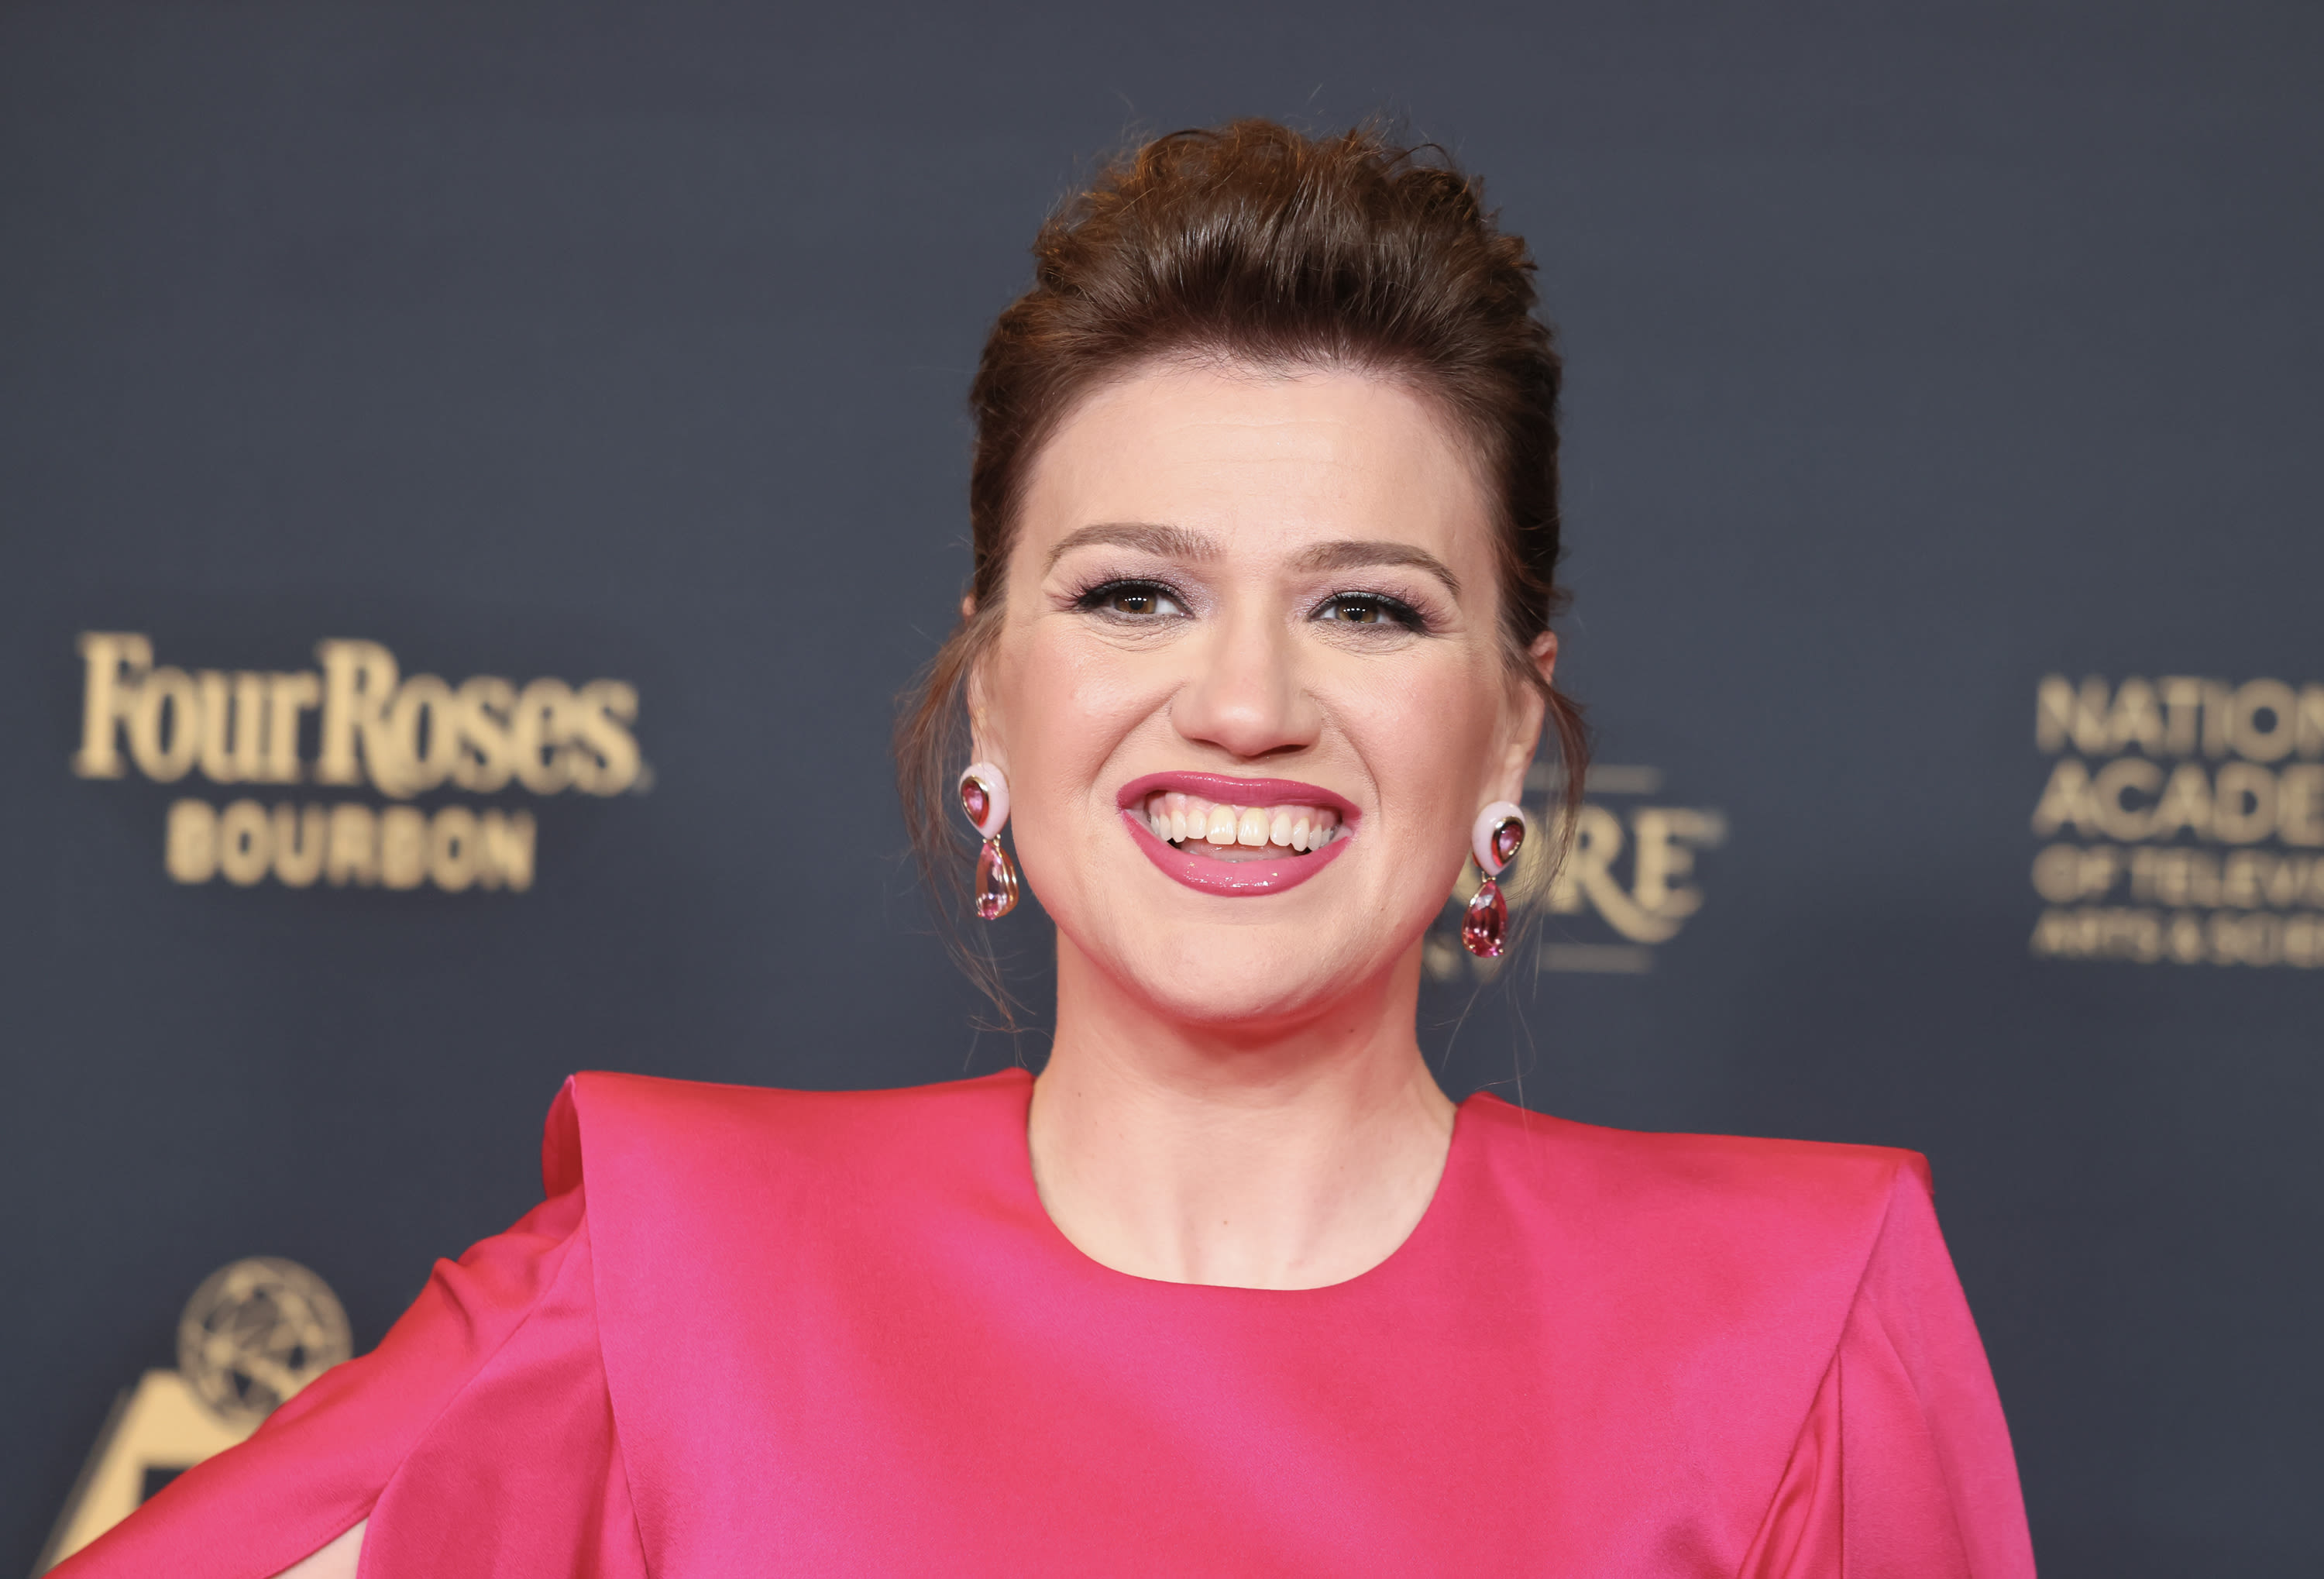 Kelly Clarkson ‘Won’t be Deterred’ From Hitting Body Goals After Dramatic 60-Pound Weight Loss